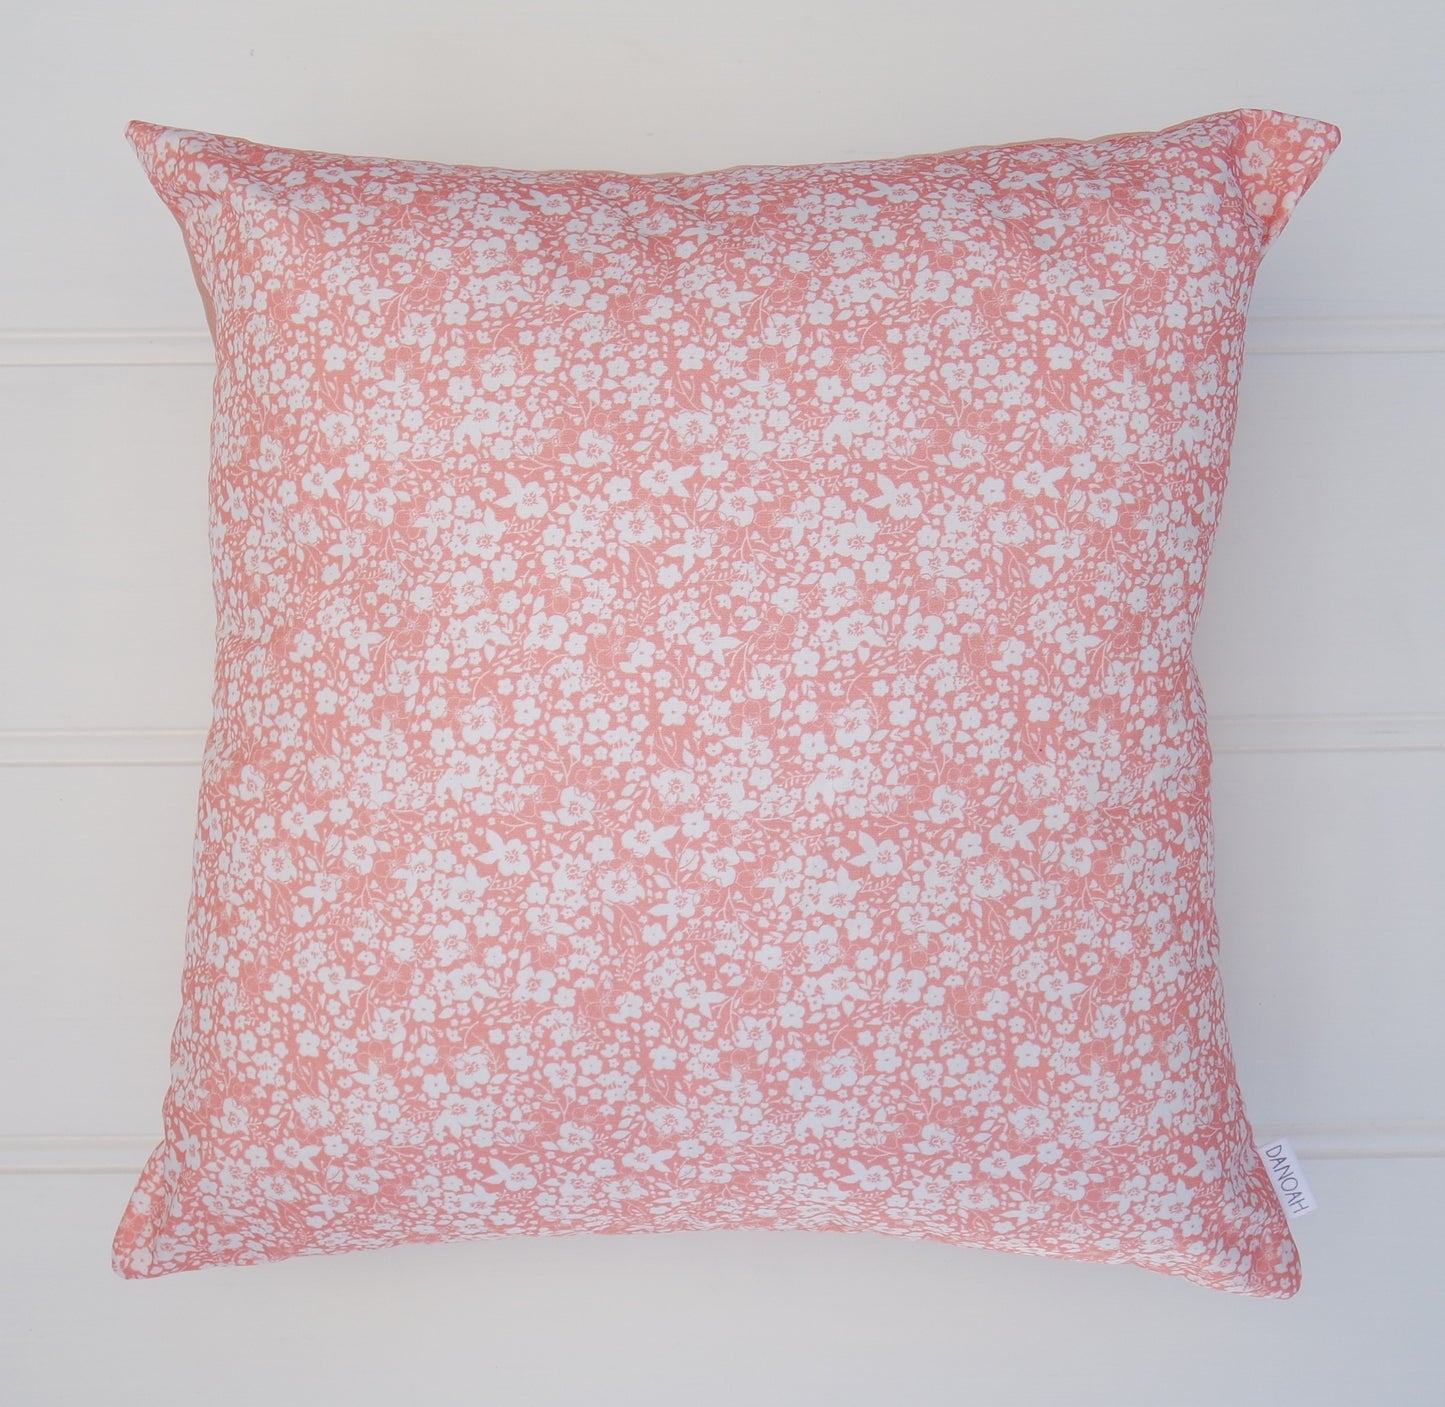 SALE - Pink Floral Cushion Cover